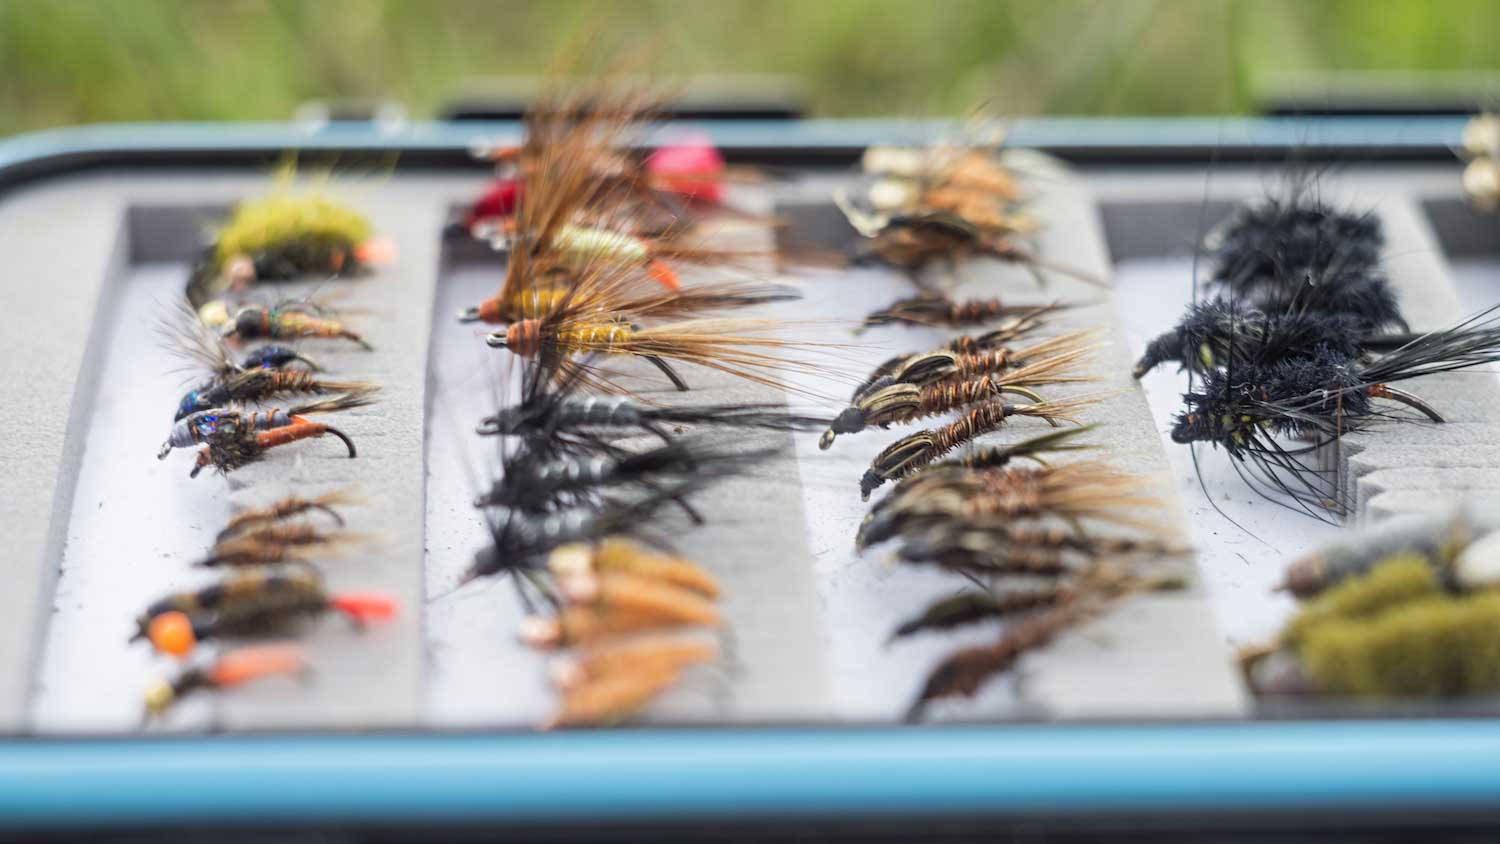 a large collection of fly-fishing lures organized in rows.